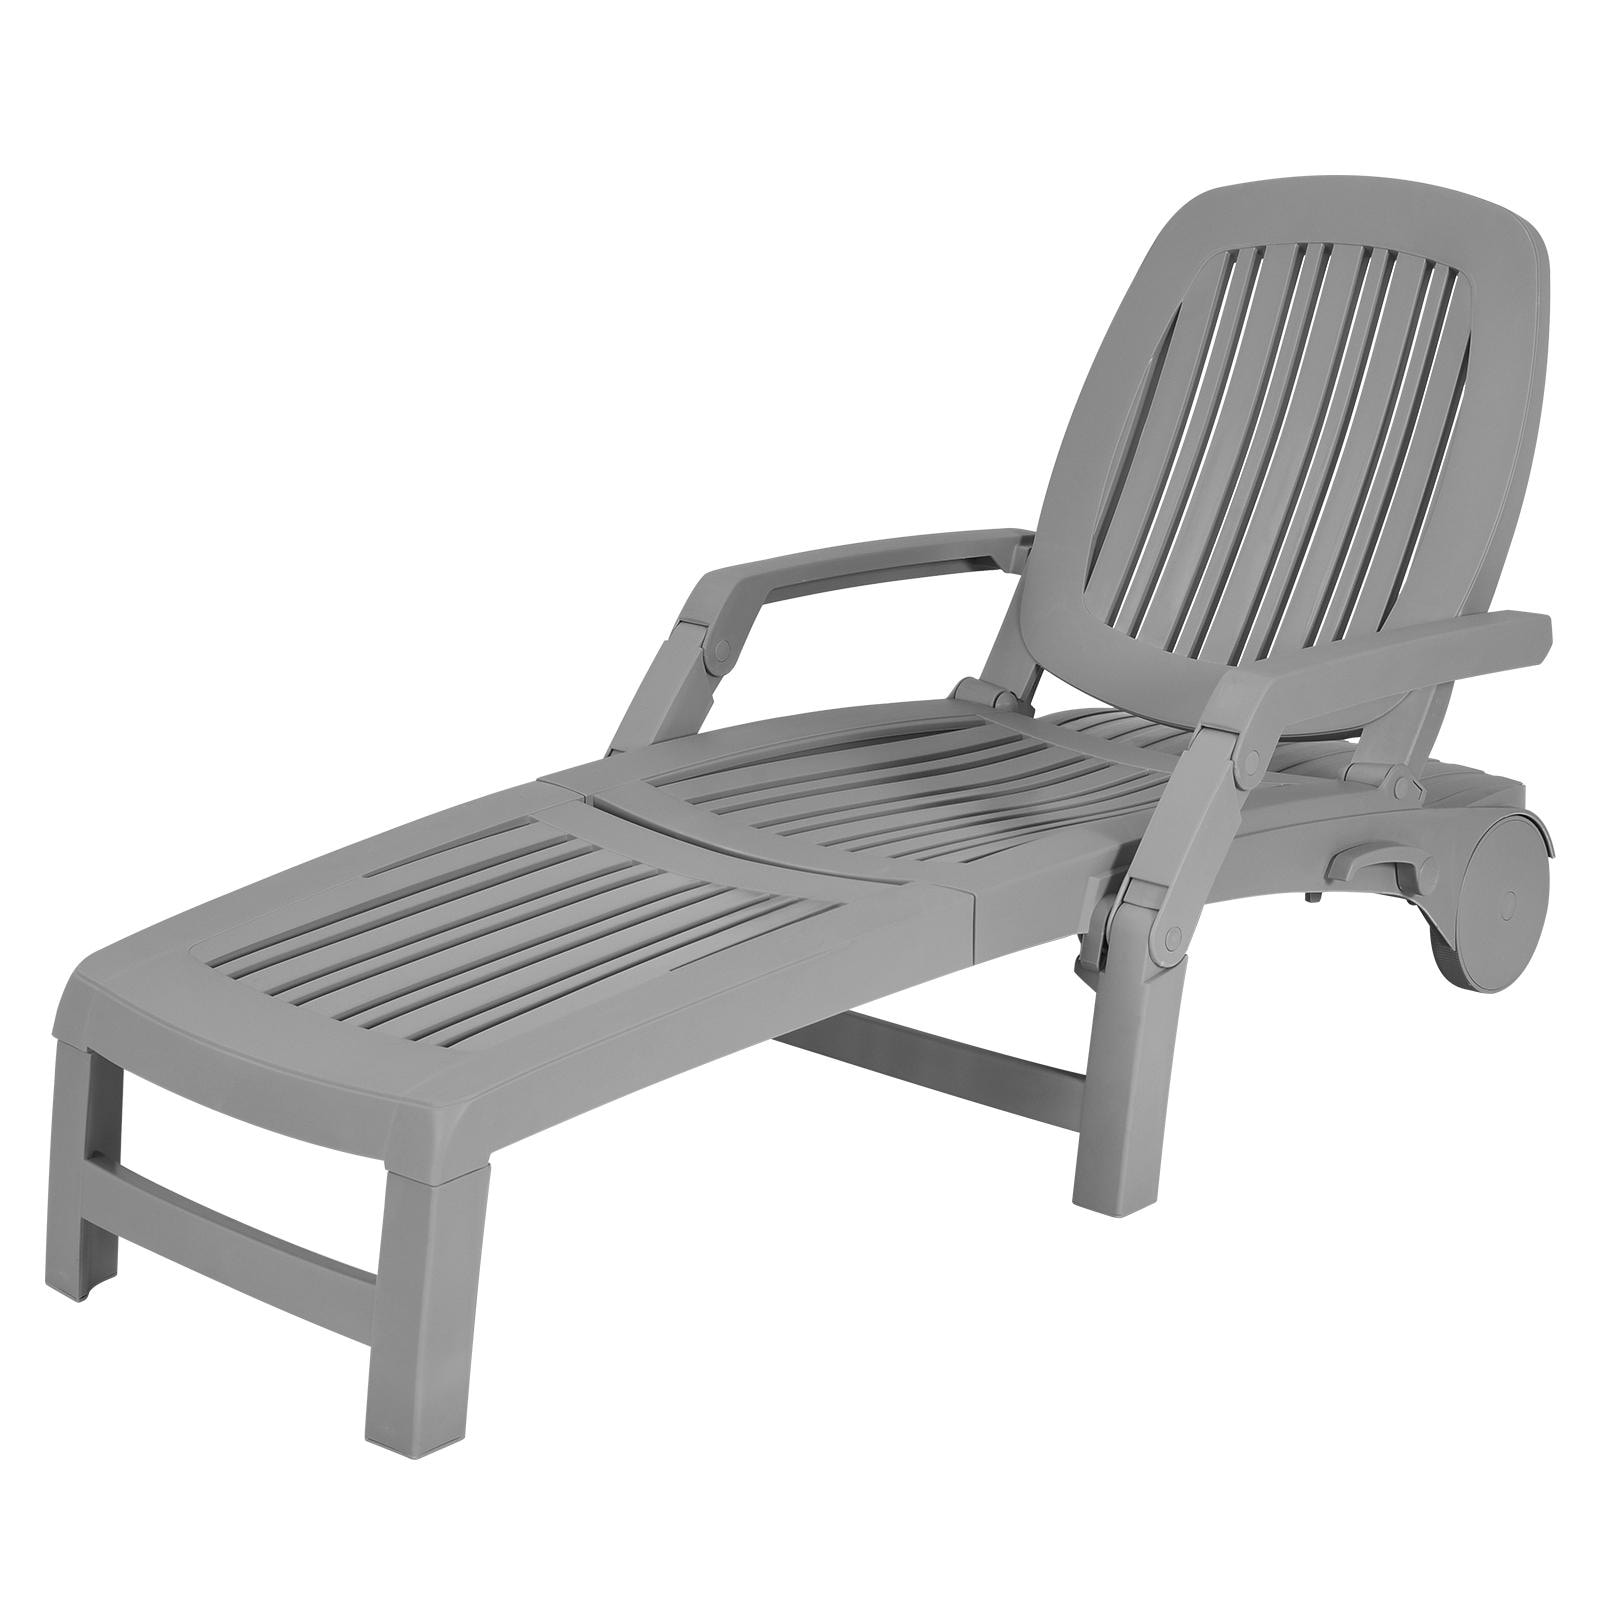 Clihome Patio Lounge Chair Gray Pp Plastic Frame Stationary Chaise ...